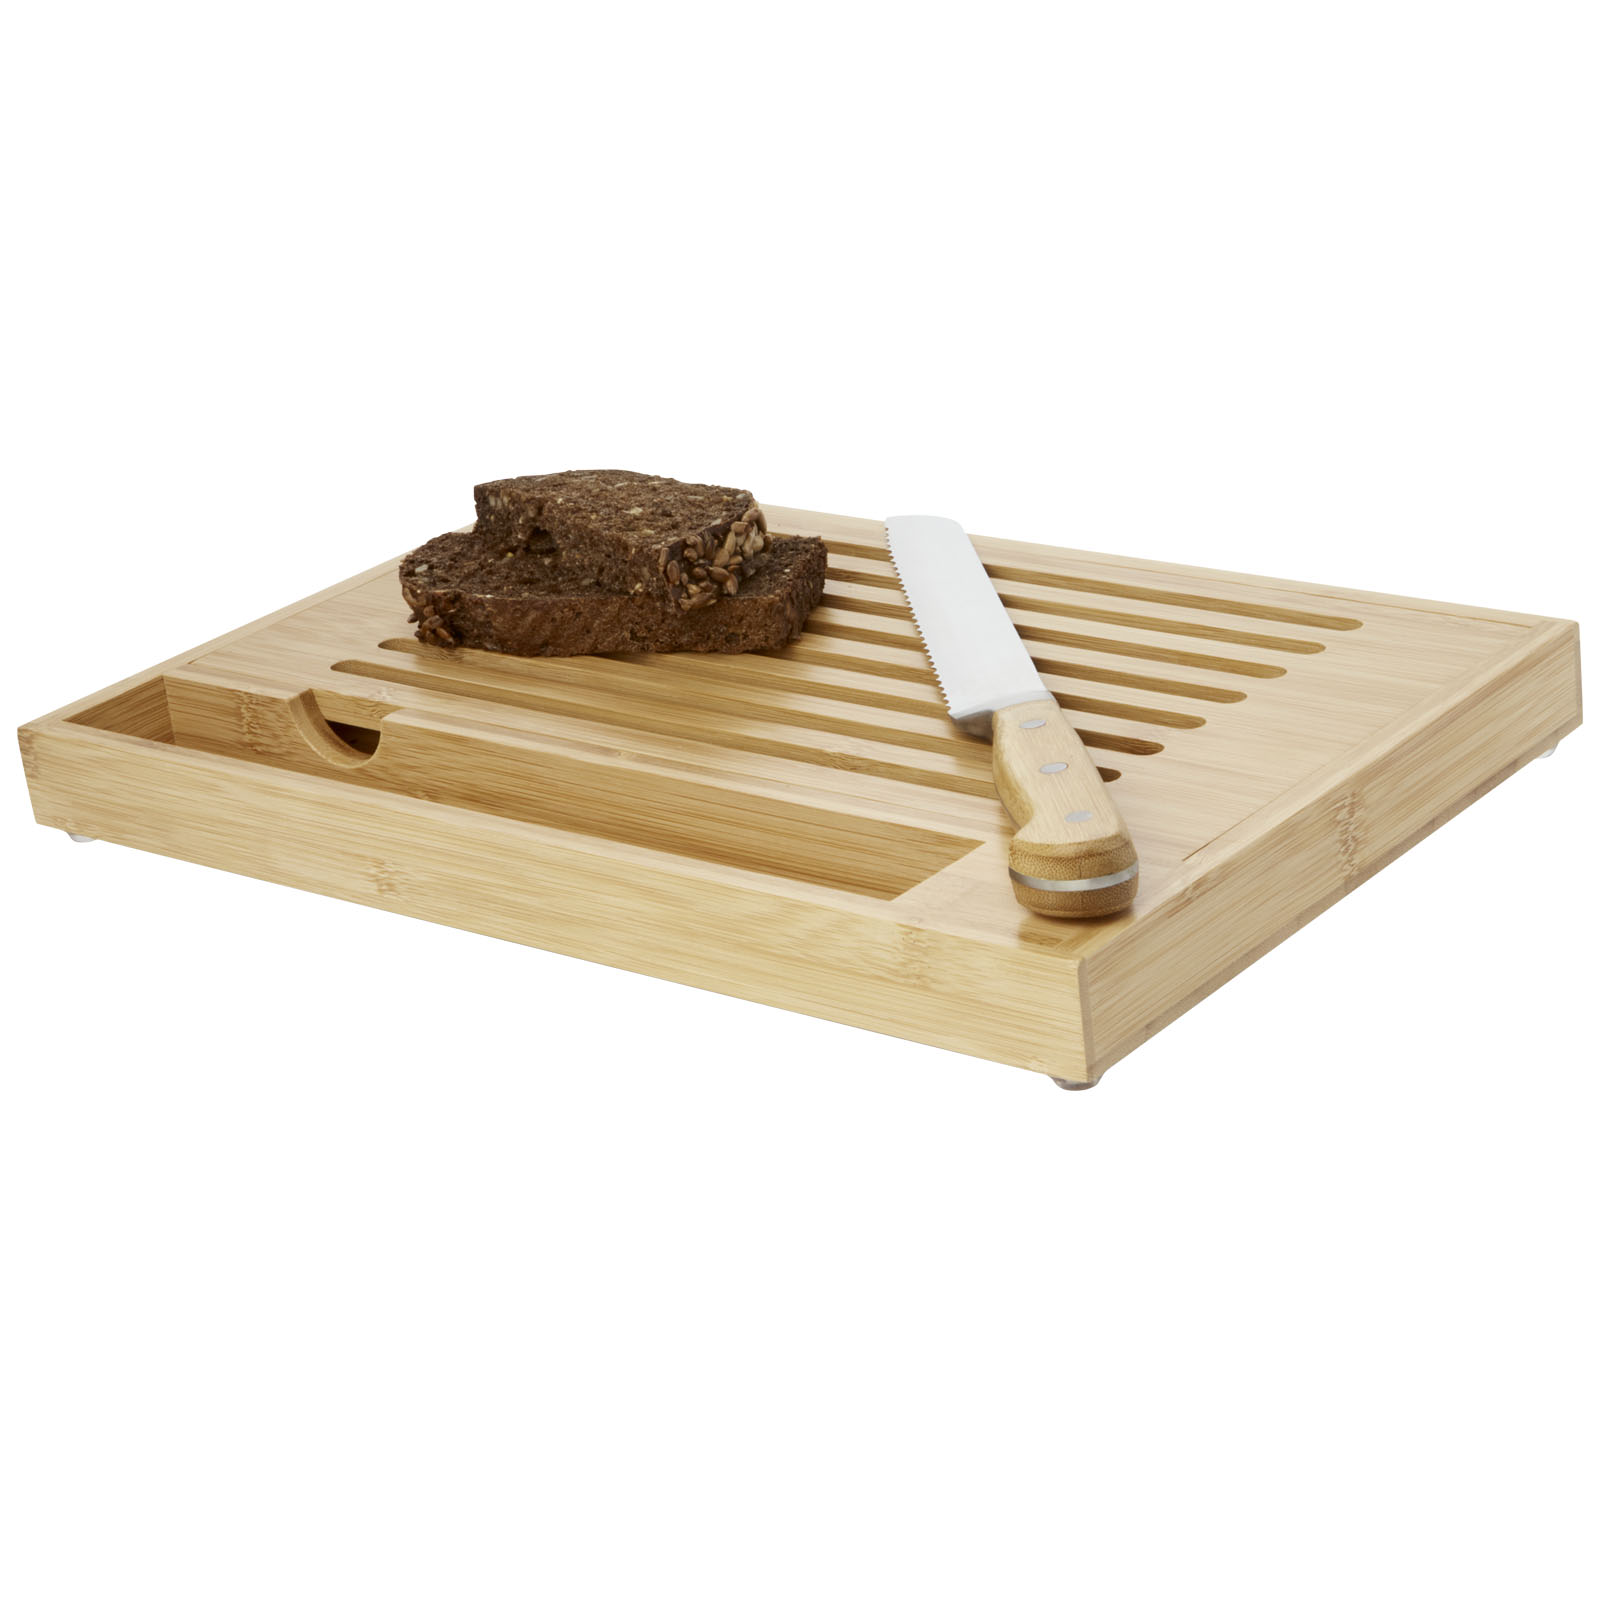 Bamboo cutting board with knife HELLENIC - natural / silver